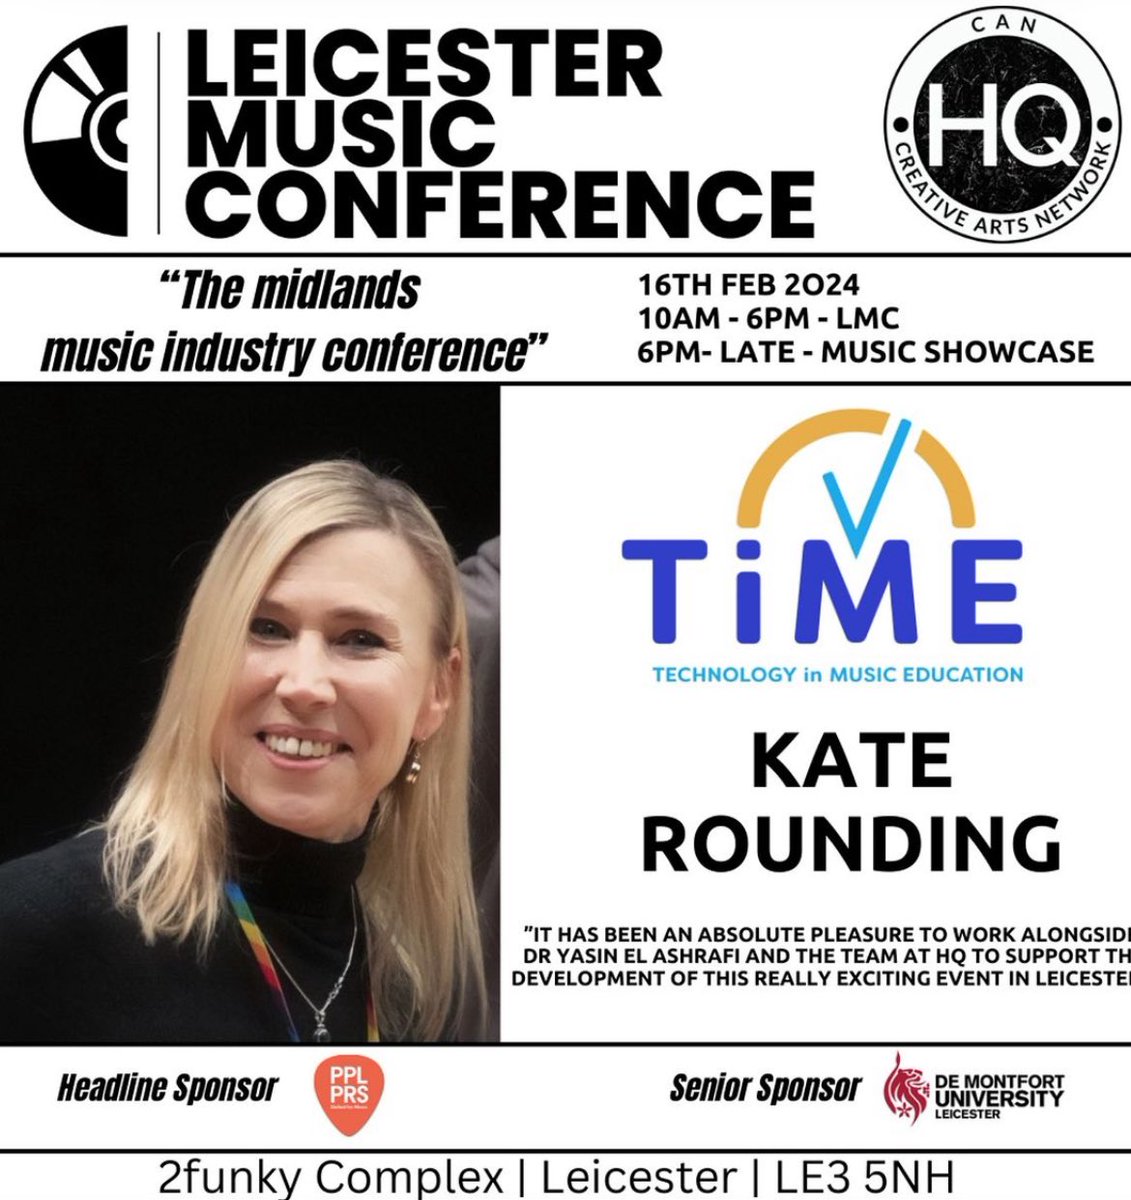 LMC are proud to present Kate Rounding as Development Director of the event, and the Executive Director of TiME.